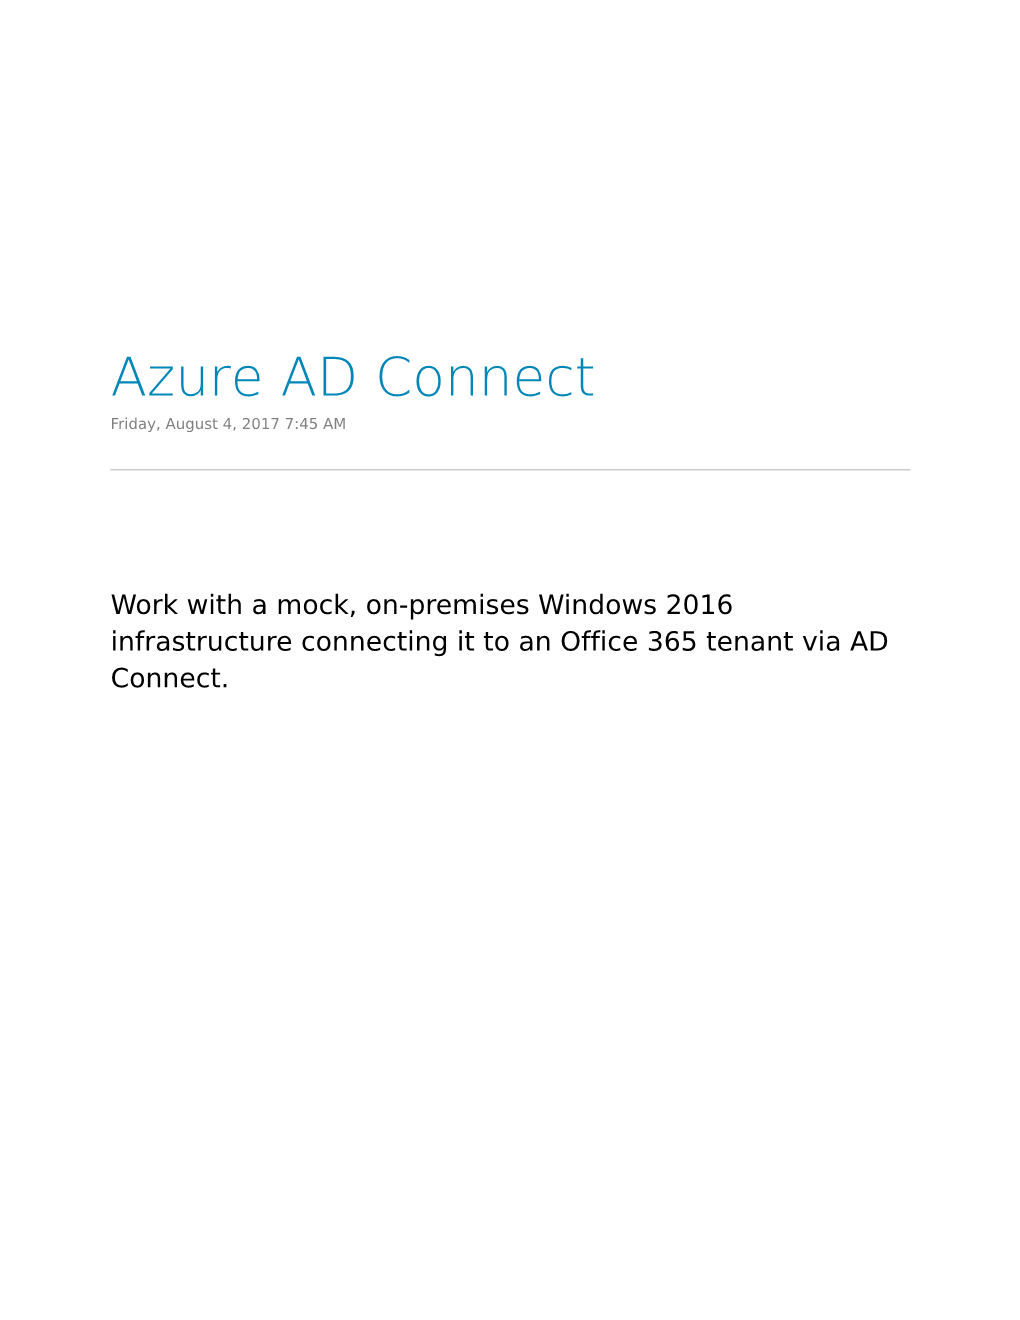 Azure AD Connect Friday, August 4, 2017 7:45 AM